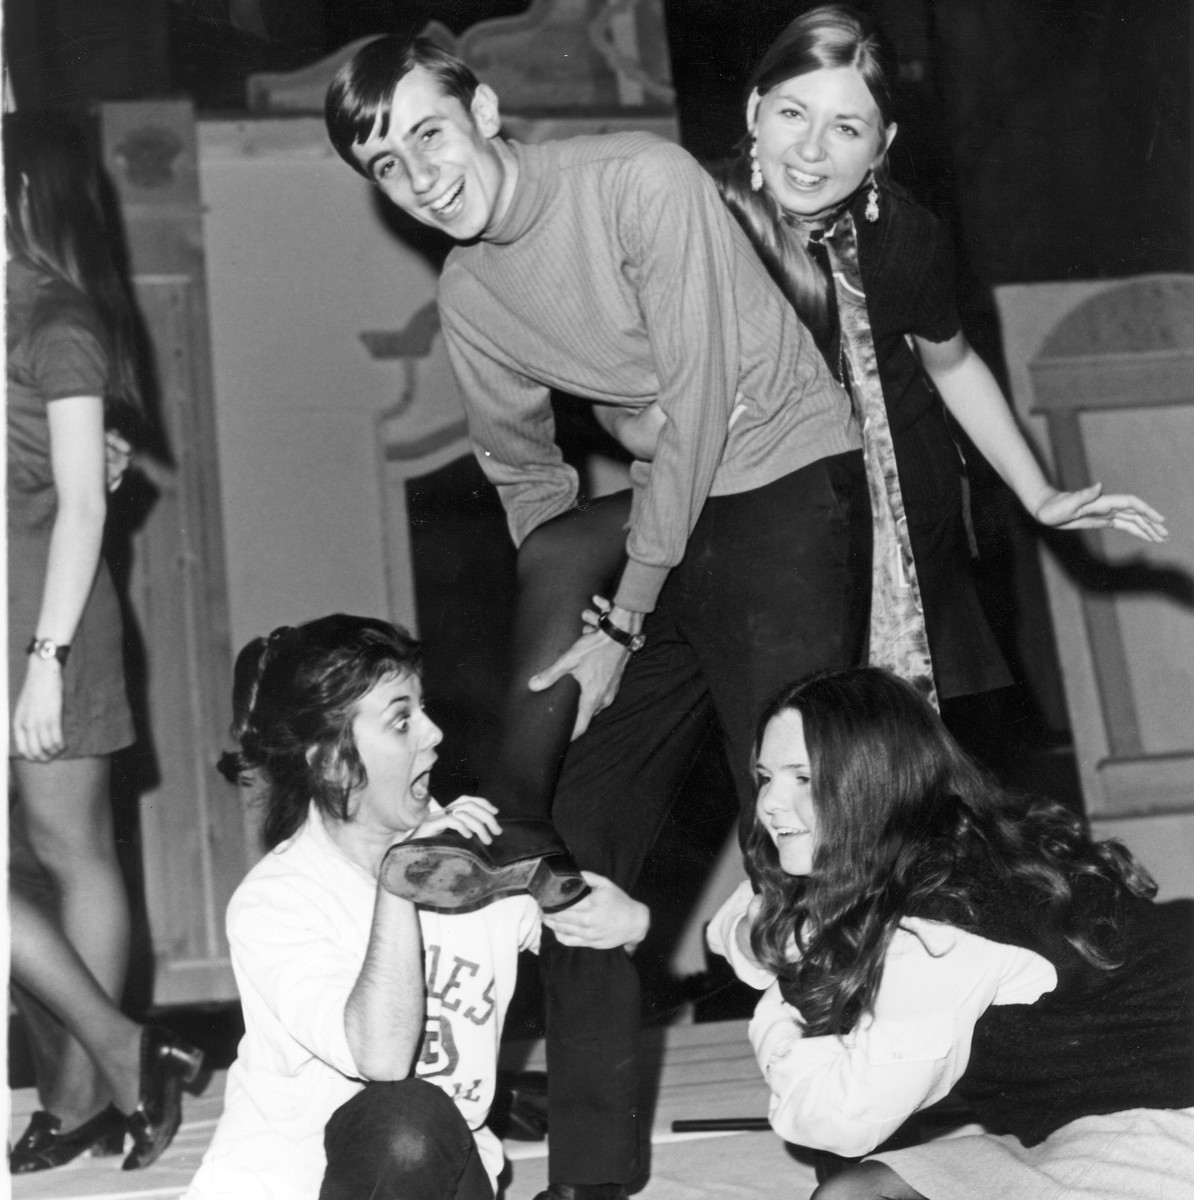 Theater students play around, 1970